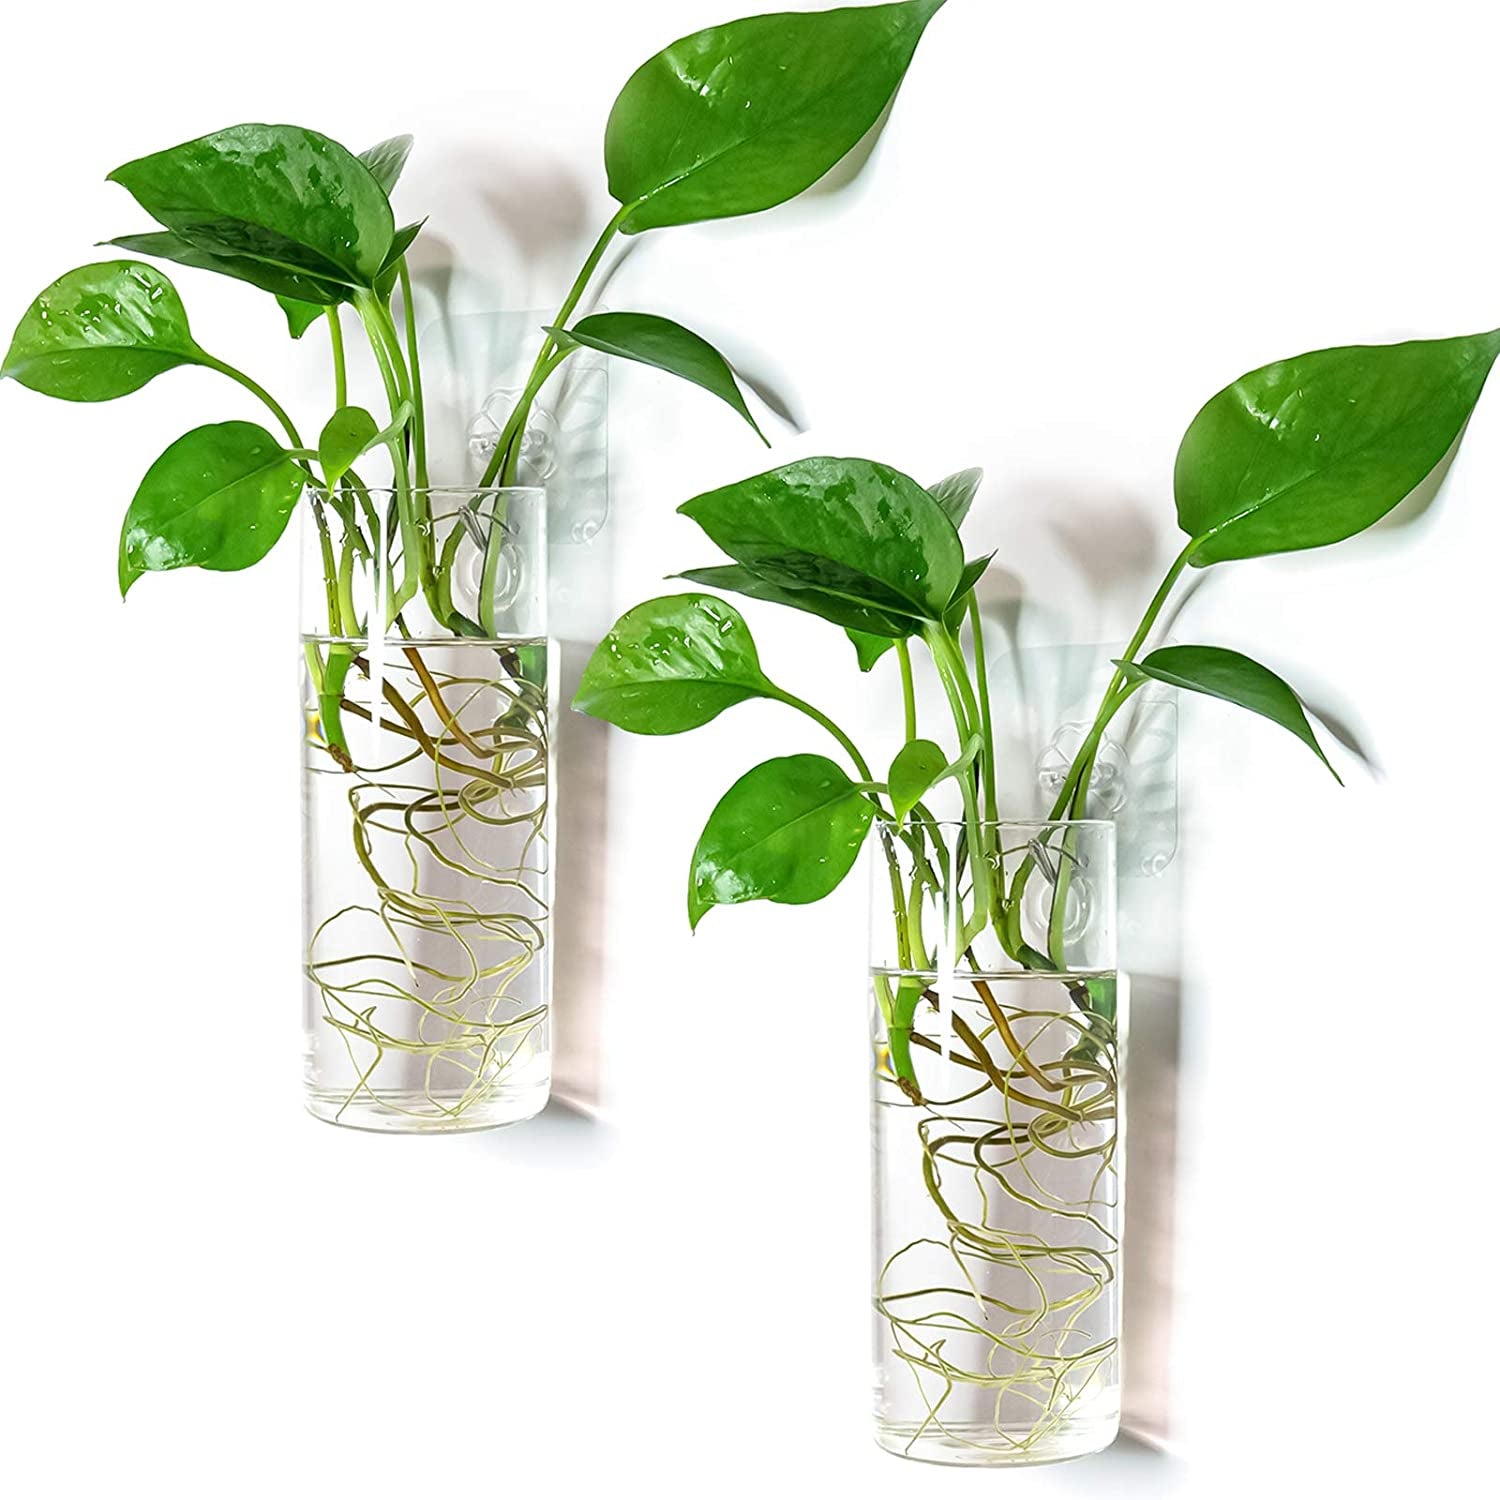 Kingbuy, Kingbuy Wall Hanging Glass Plant Terrarium Container Cylinder Shape.2Pcs Planter Air Decorations for Home Decor